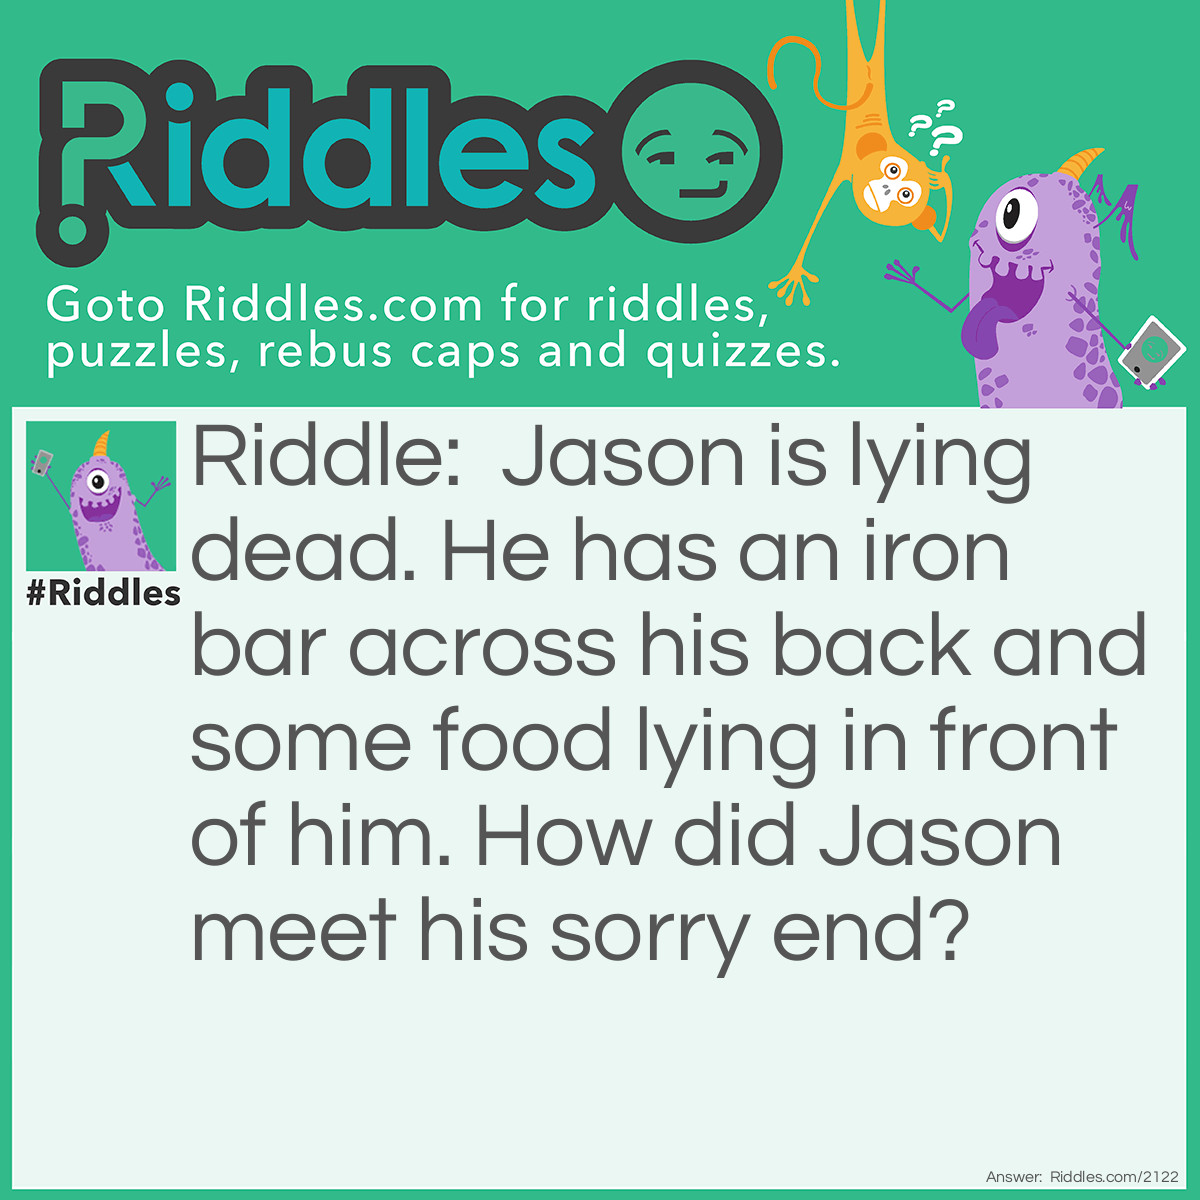 Riddle: Jason is lying dead. He has an iron bar across his back and some food lying in front of him.
How did Jason meet his sorry end? Answer: He is a mouse caught in a mousetrap.